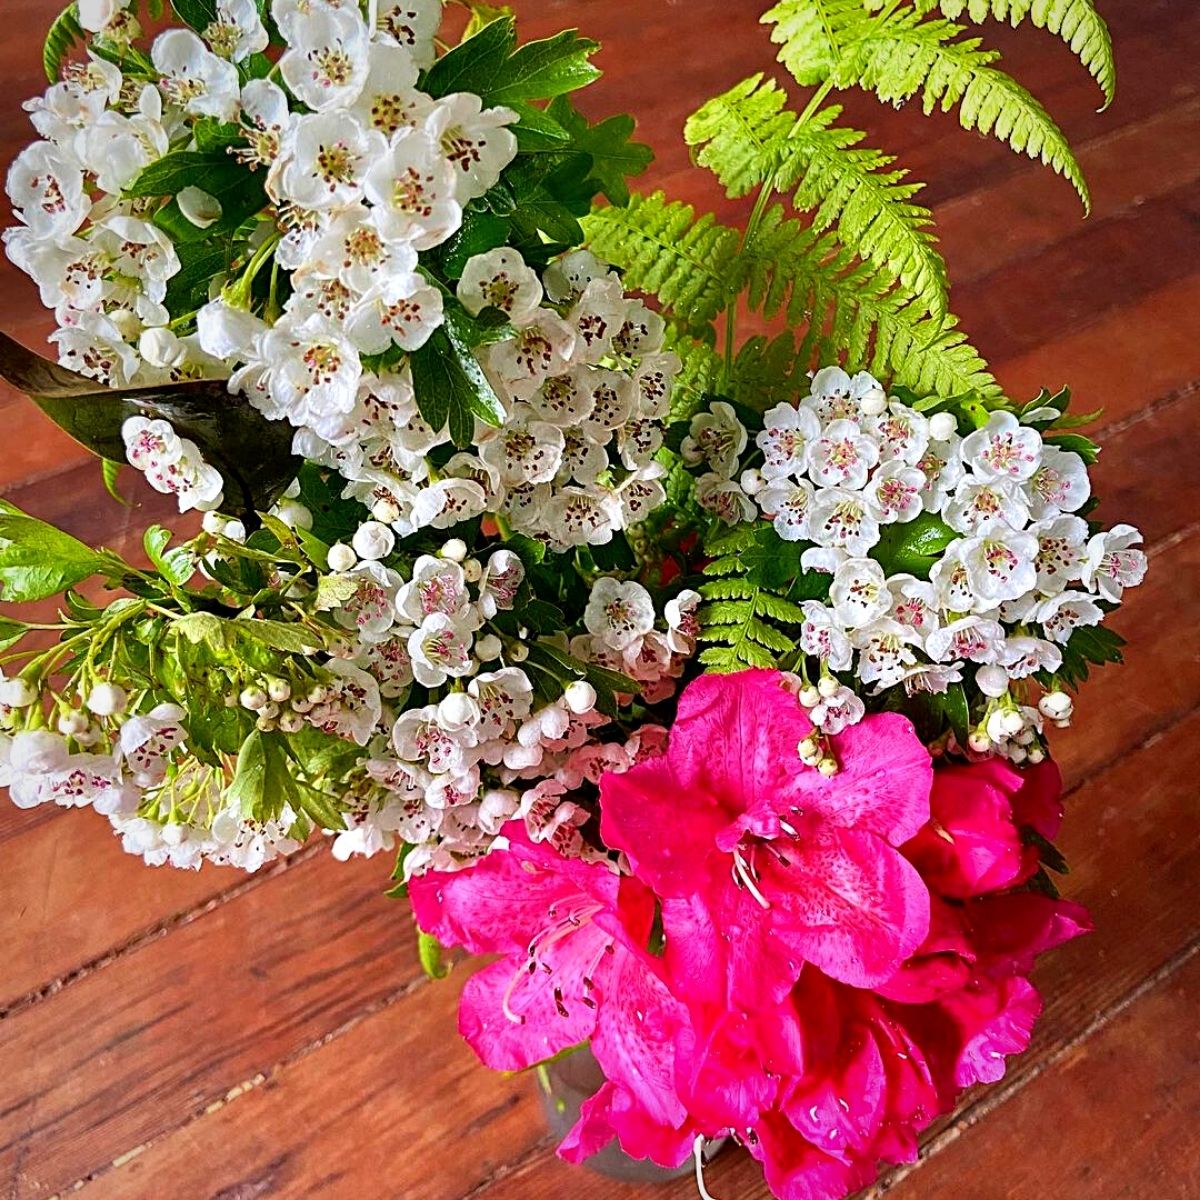 hawthorns and other flowers in a vase